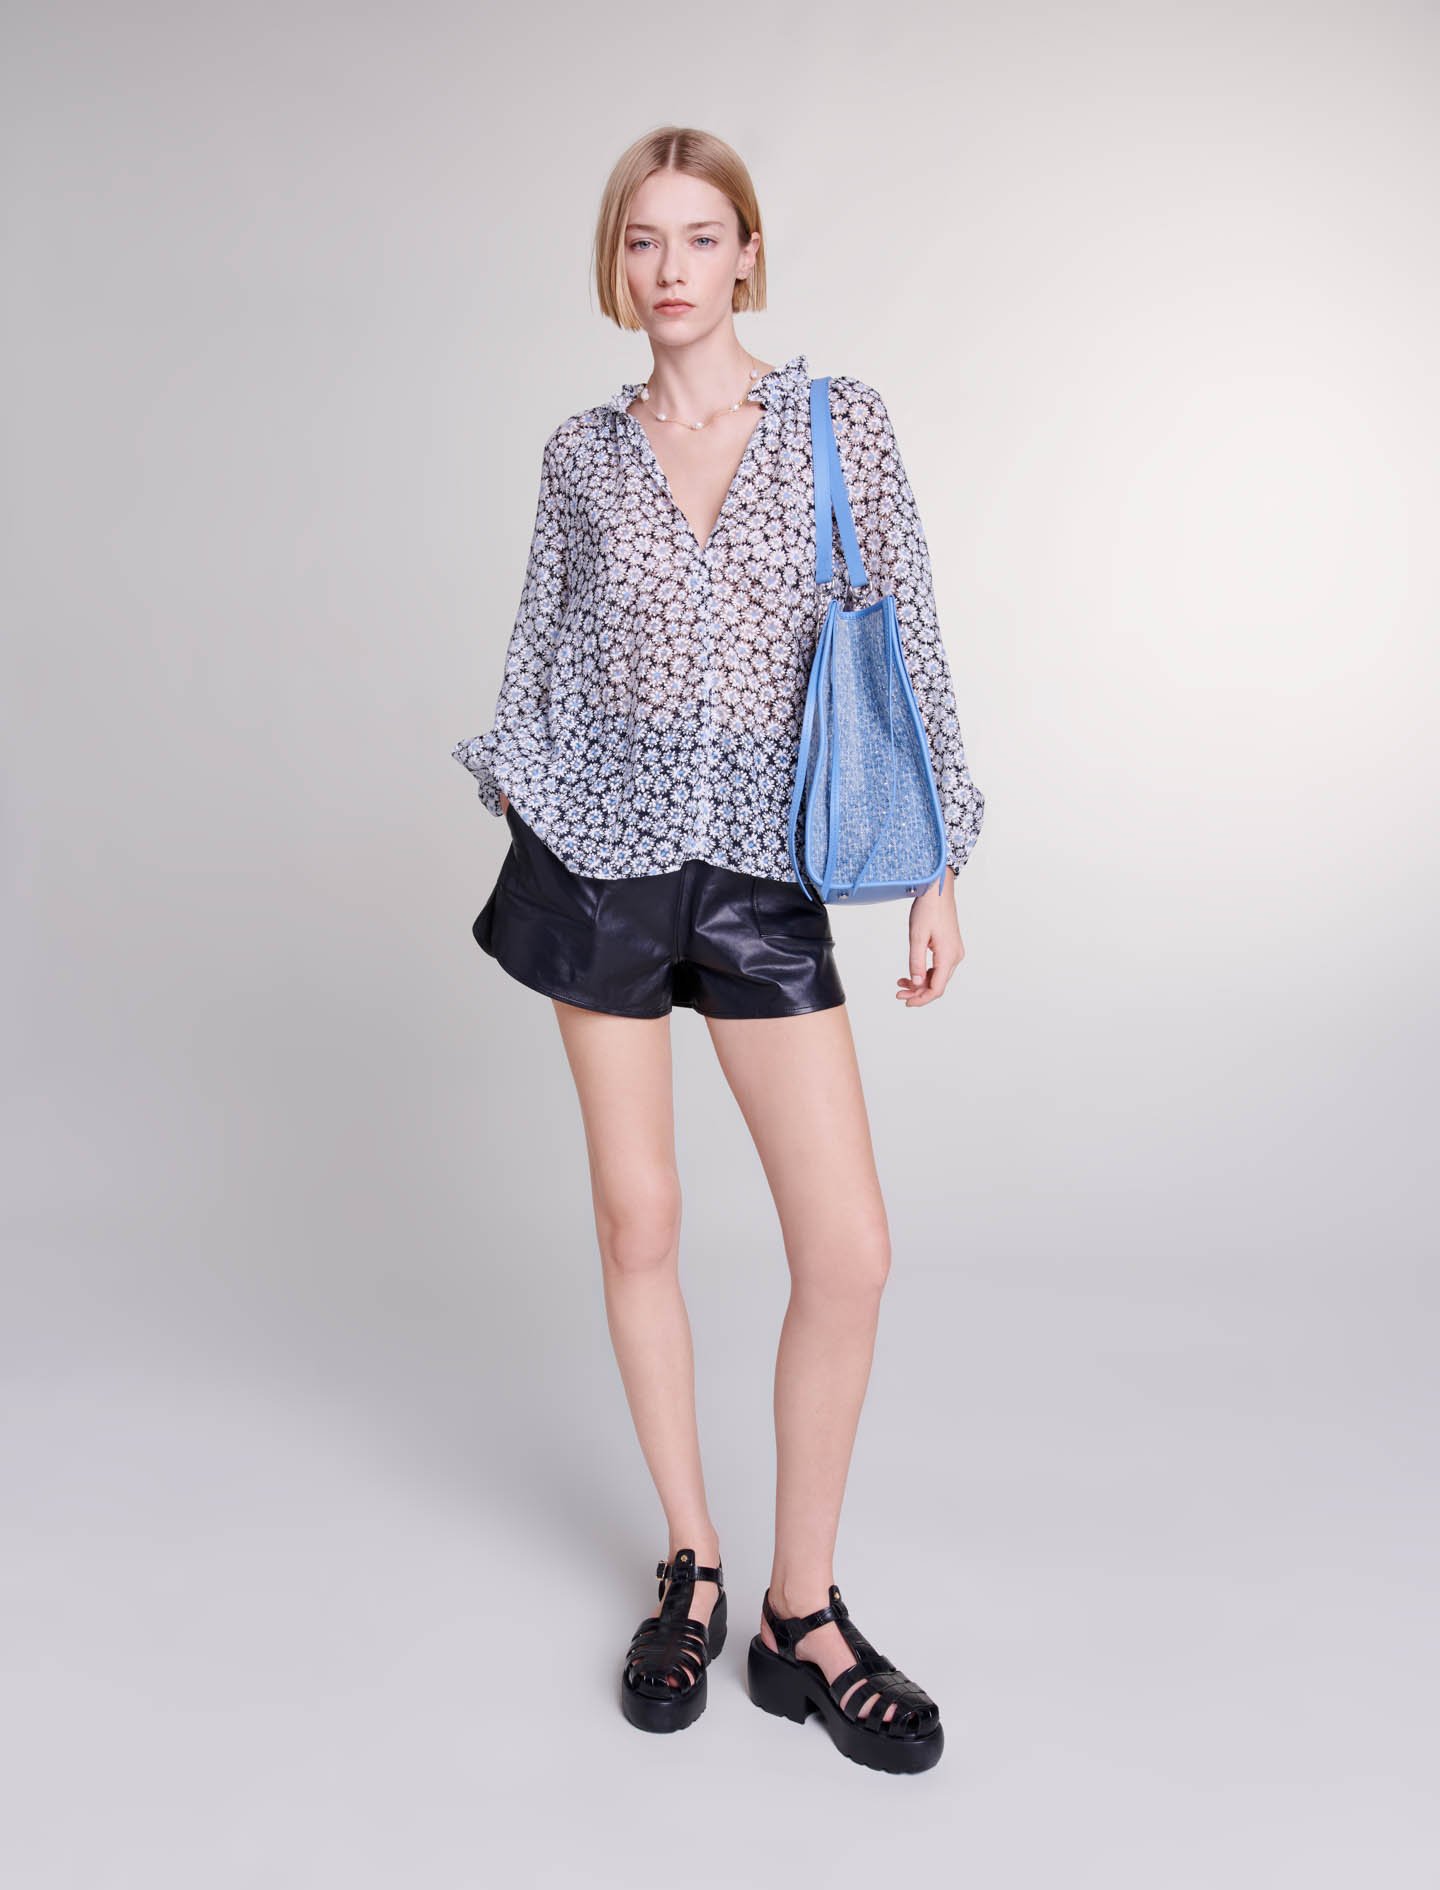 Mixte's viscose, Floral blouse for Spring/Summer, size Mixte-Tops & Shirts-US L / FR 3, in color Blue Daisy Print /